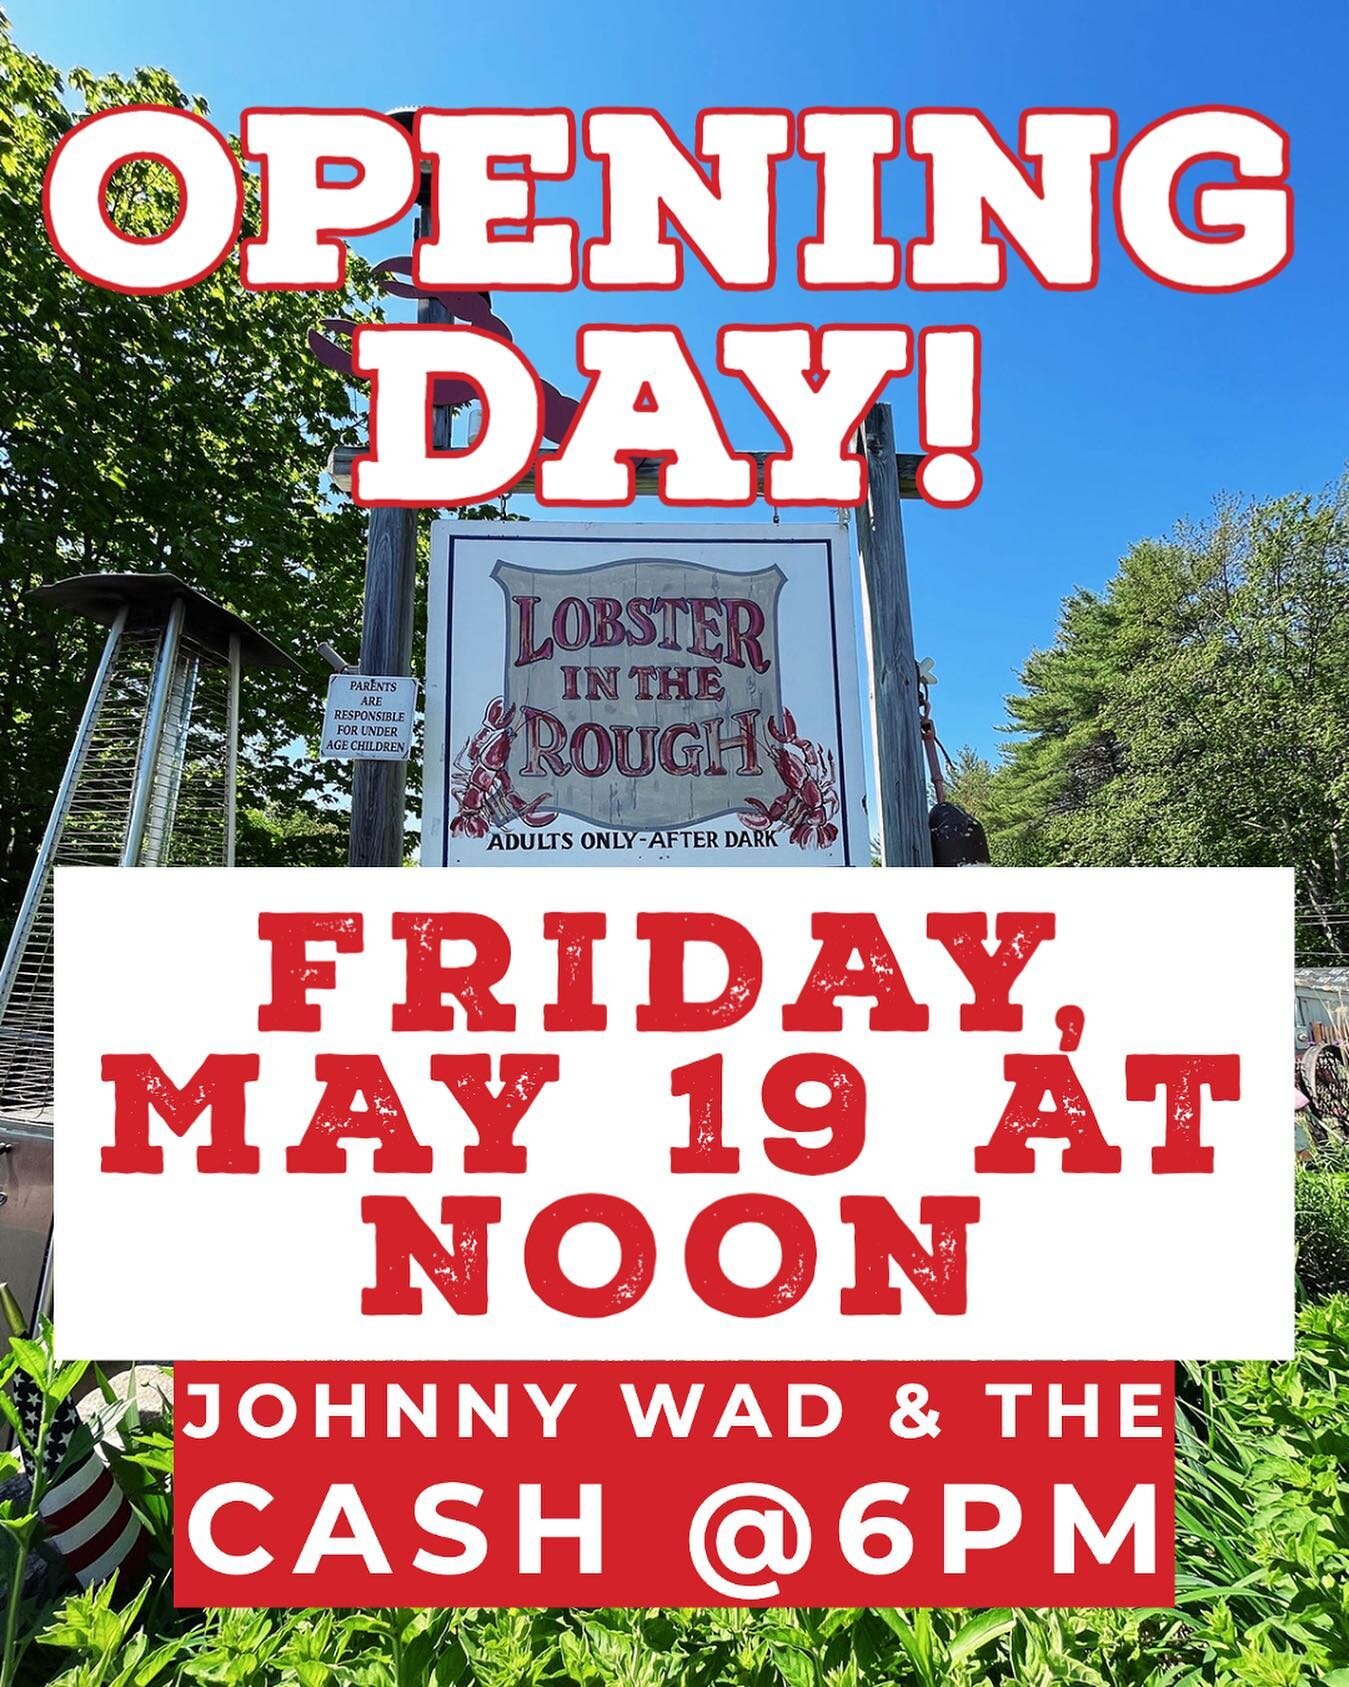 Hello 2023 season! Join us Friday, May 19th to kick off the summer. Johnny Wad, Rum Punches &amp; lobster rolls - a killer Rough combo! Buckle up, because summer is here!
.
.
.
.
#yorkbeachmaine #therough #lobsterintherough #mainefoodie #yorkbeach #y